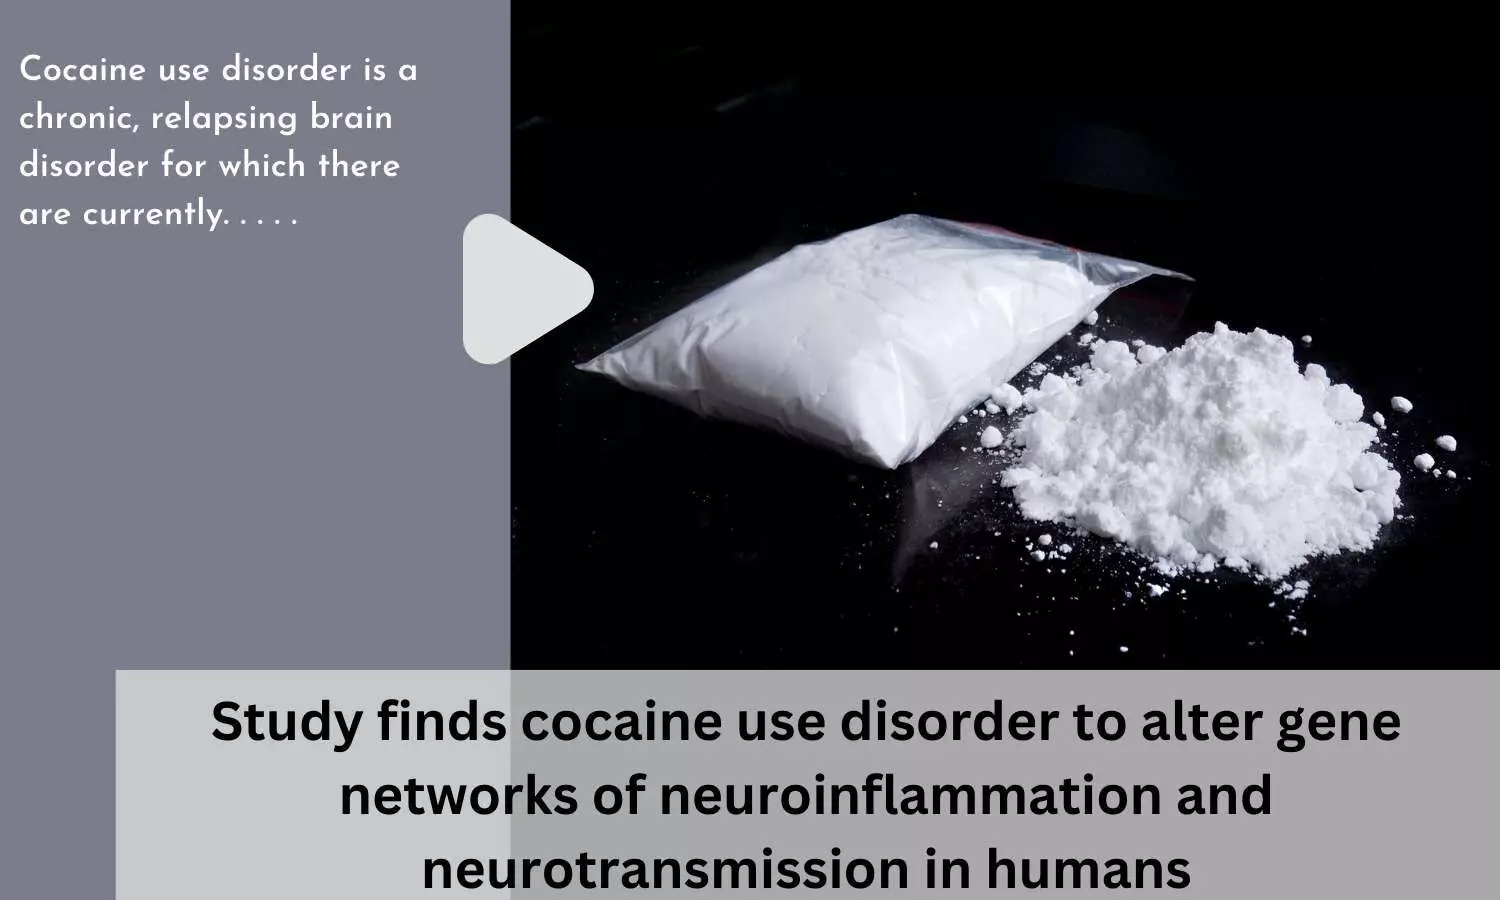 Study finds cocaine use disorder to alter gene networks of neuroinflammation and neurotransmission in humans